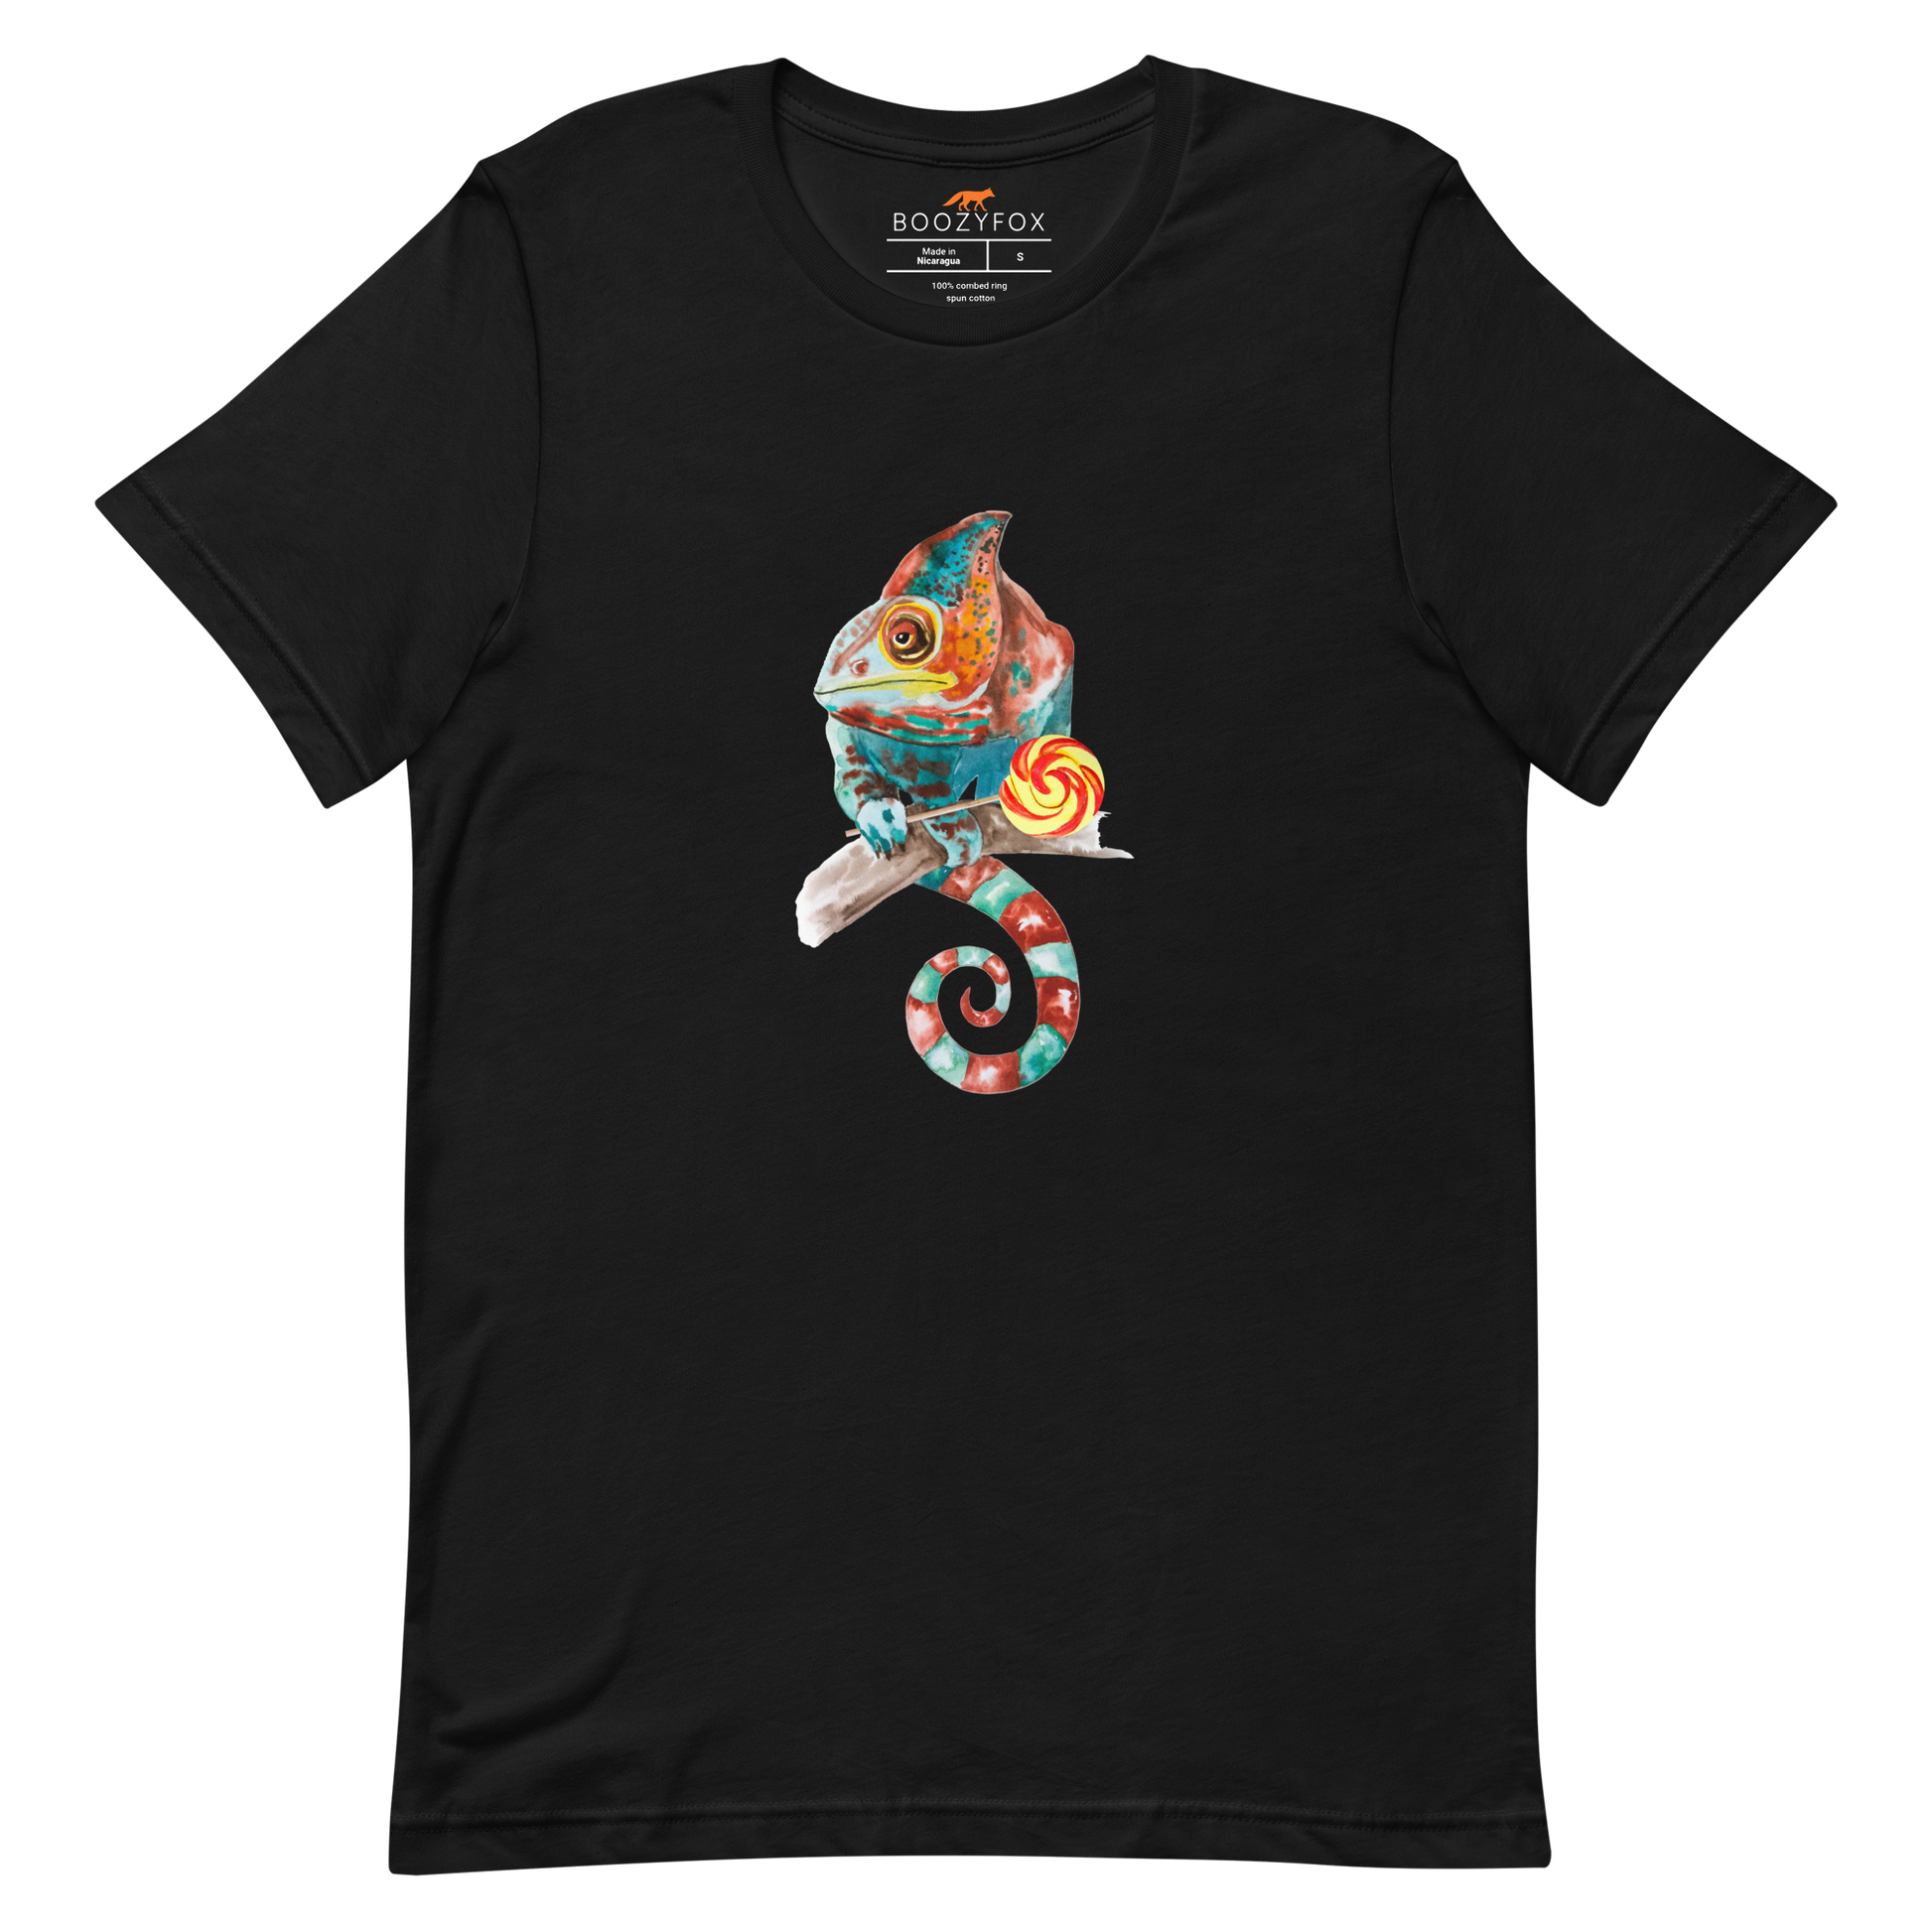 Black Premium Chameleon T-Shirt featuring a charming Chameleon With A Lollipop graphic on the chest - Cool Graphic Chameleon Tees - Boozy Fox